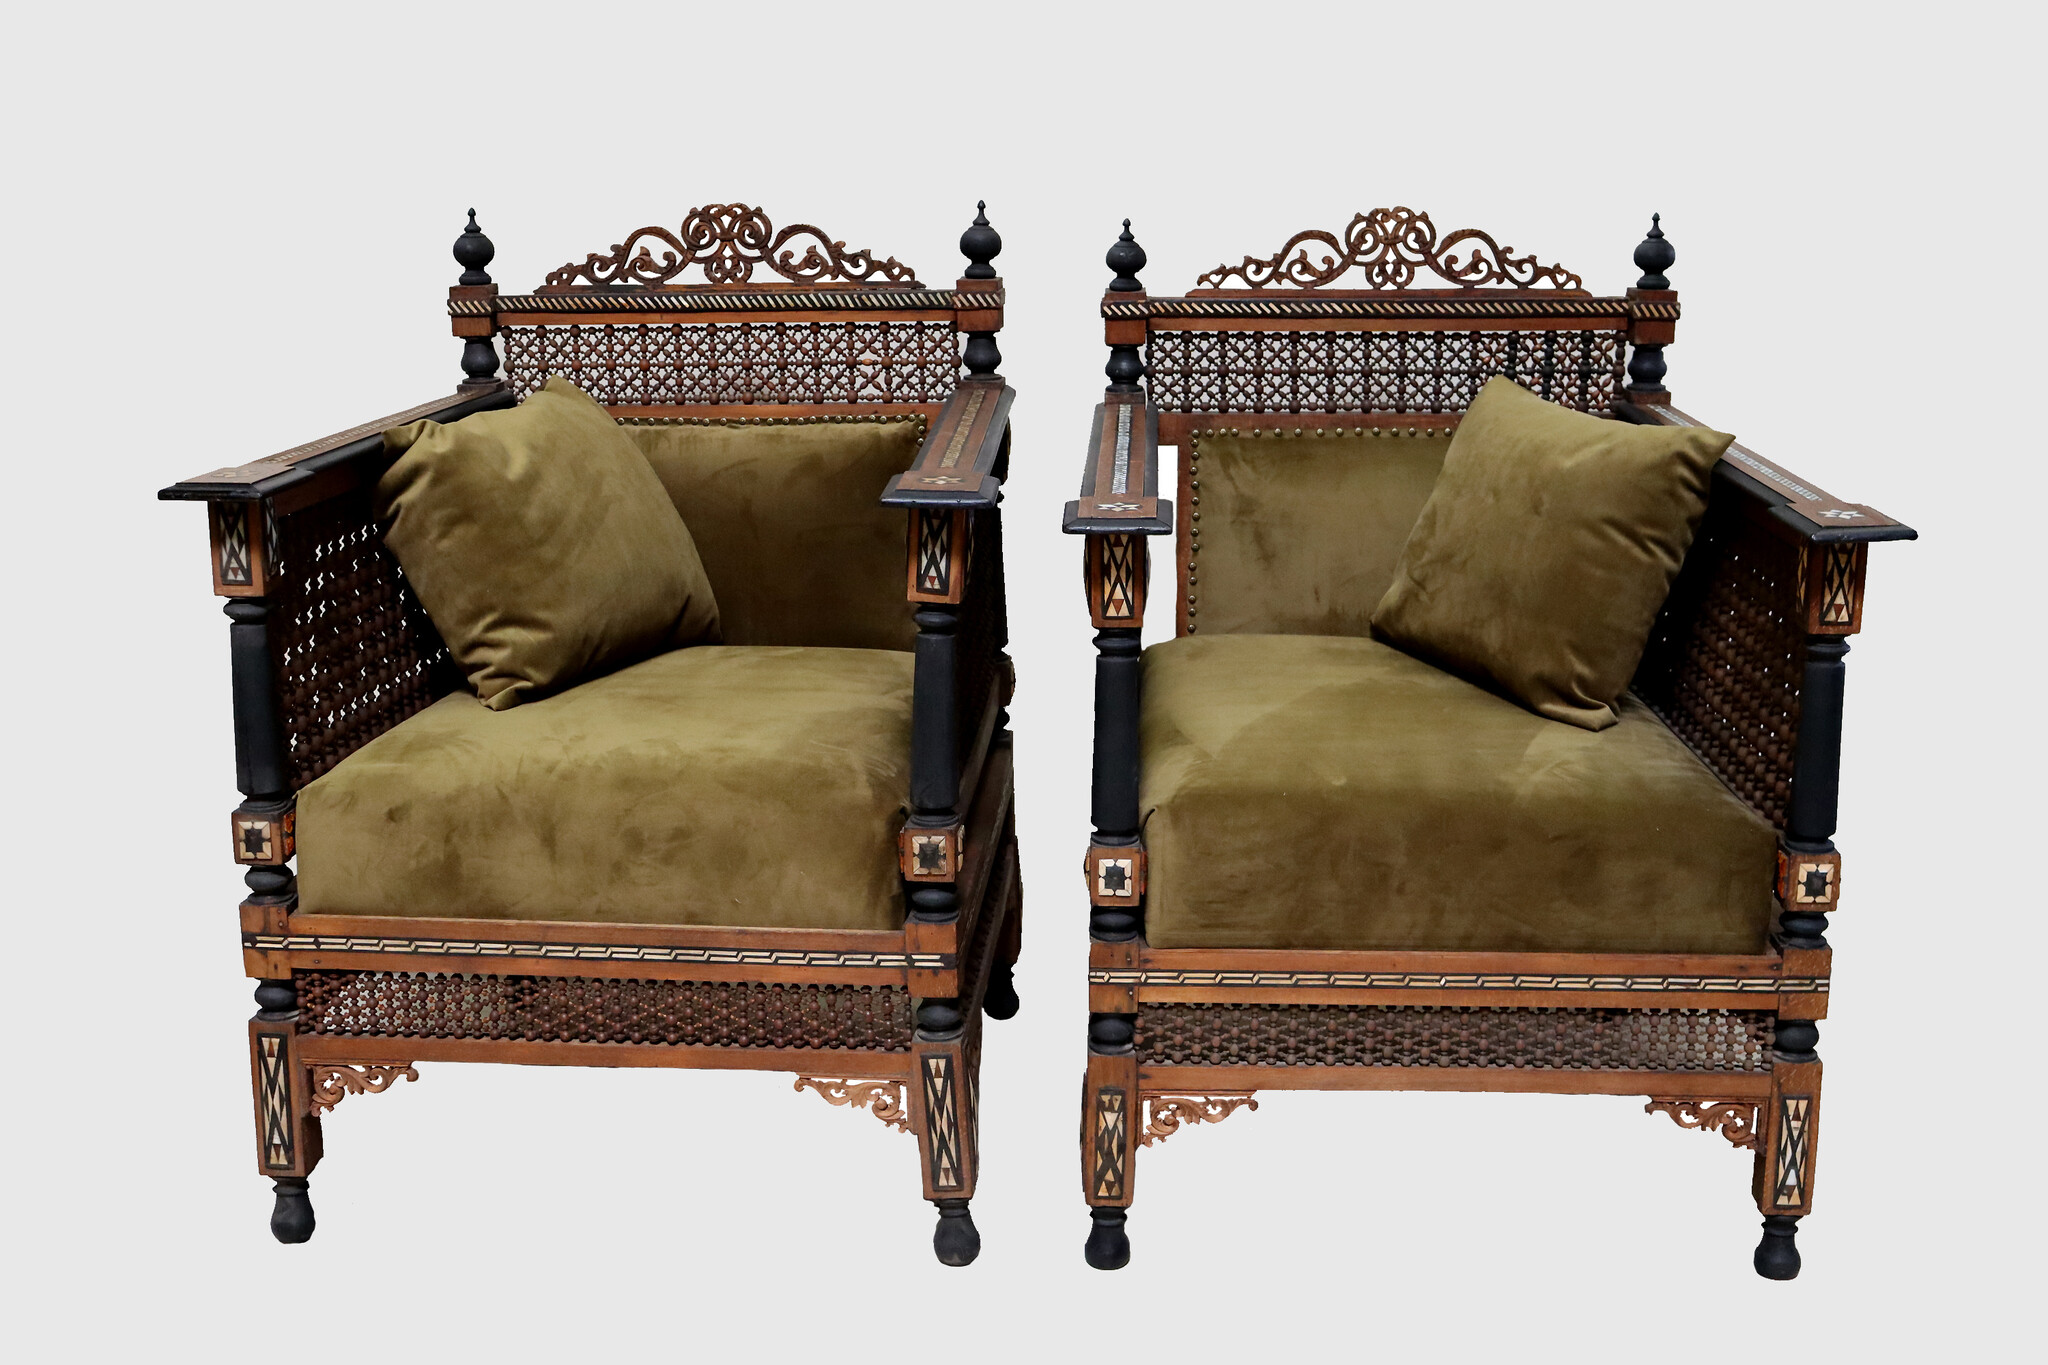 7-piece  Antique Mother of Pearl Inlay  Syrian Sofa set